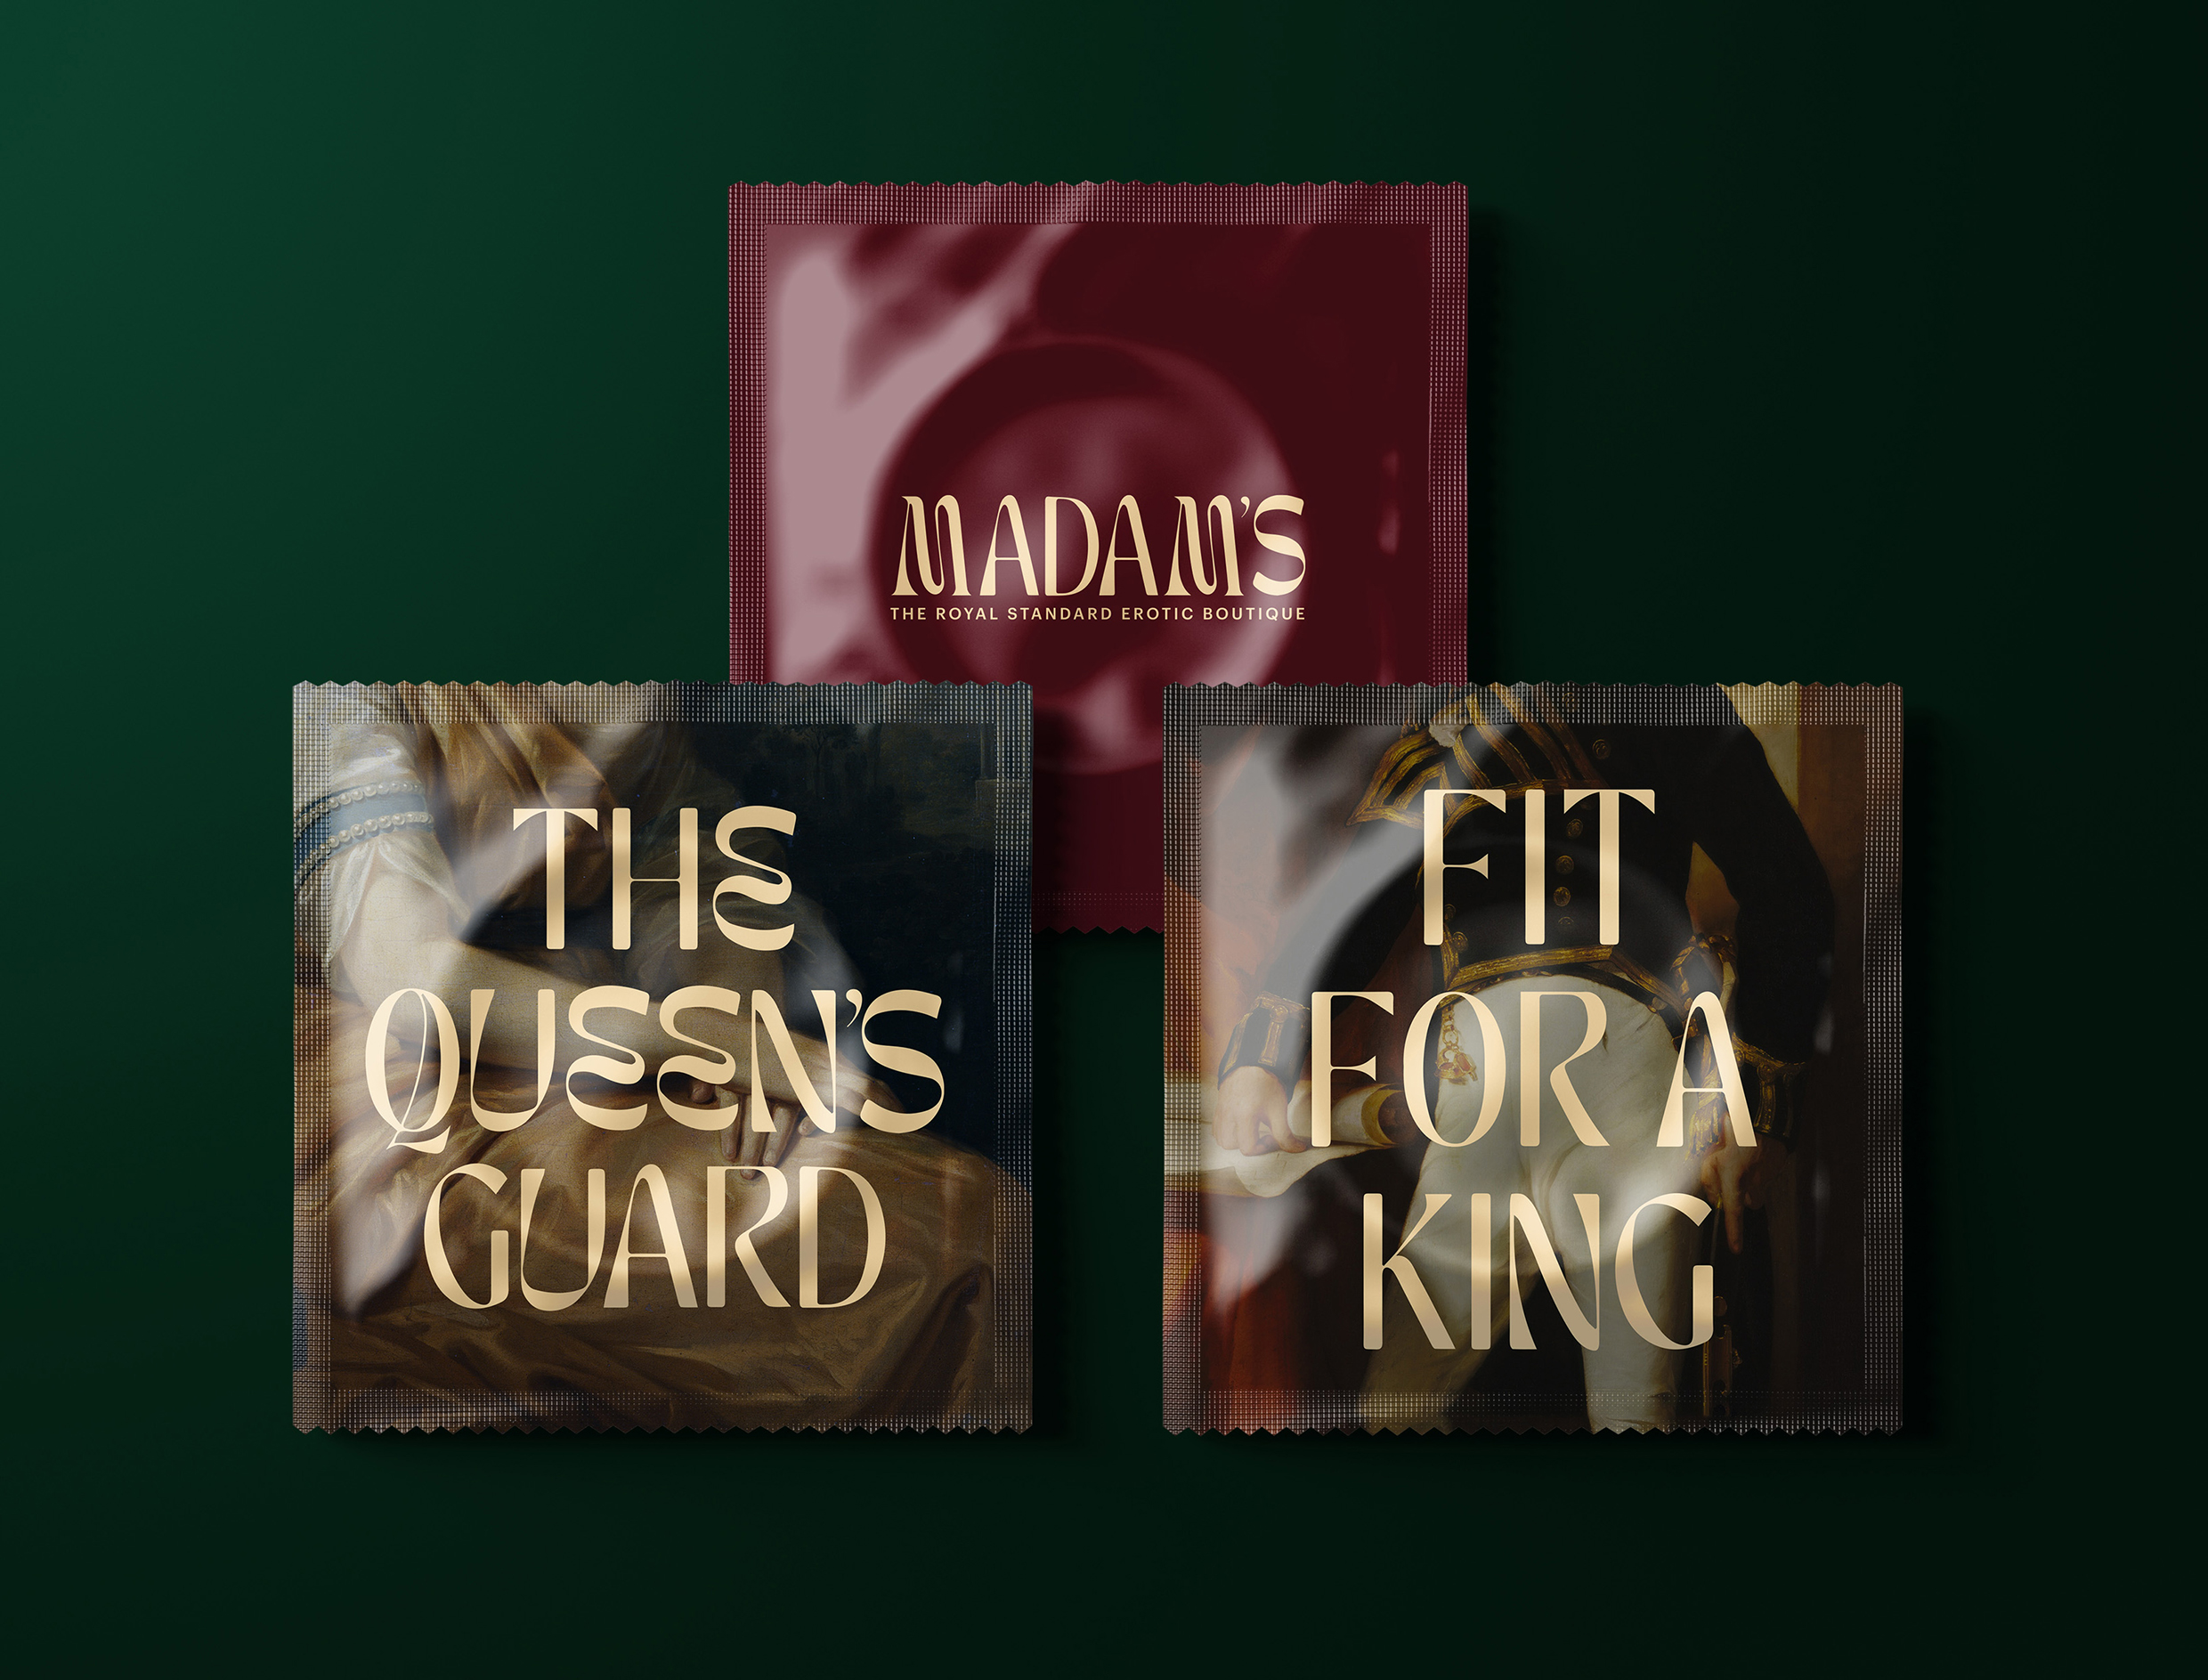 Condoms for the brand Madam's showing royal portrait and cheeky copywriting 'The Queens Guard' and 'Fit for a King'